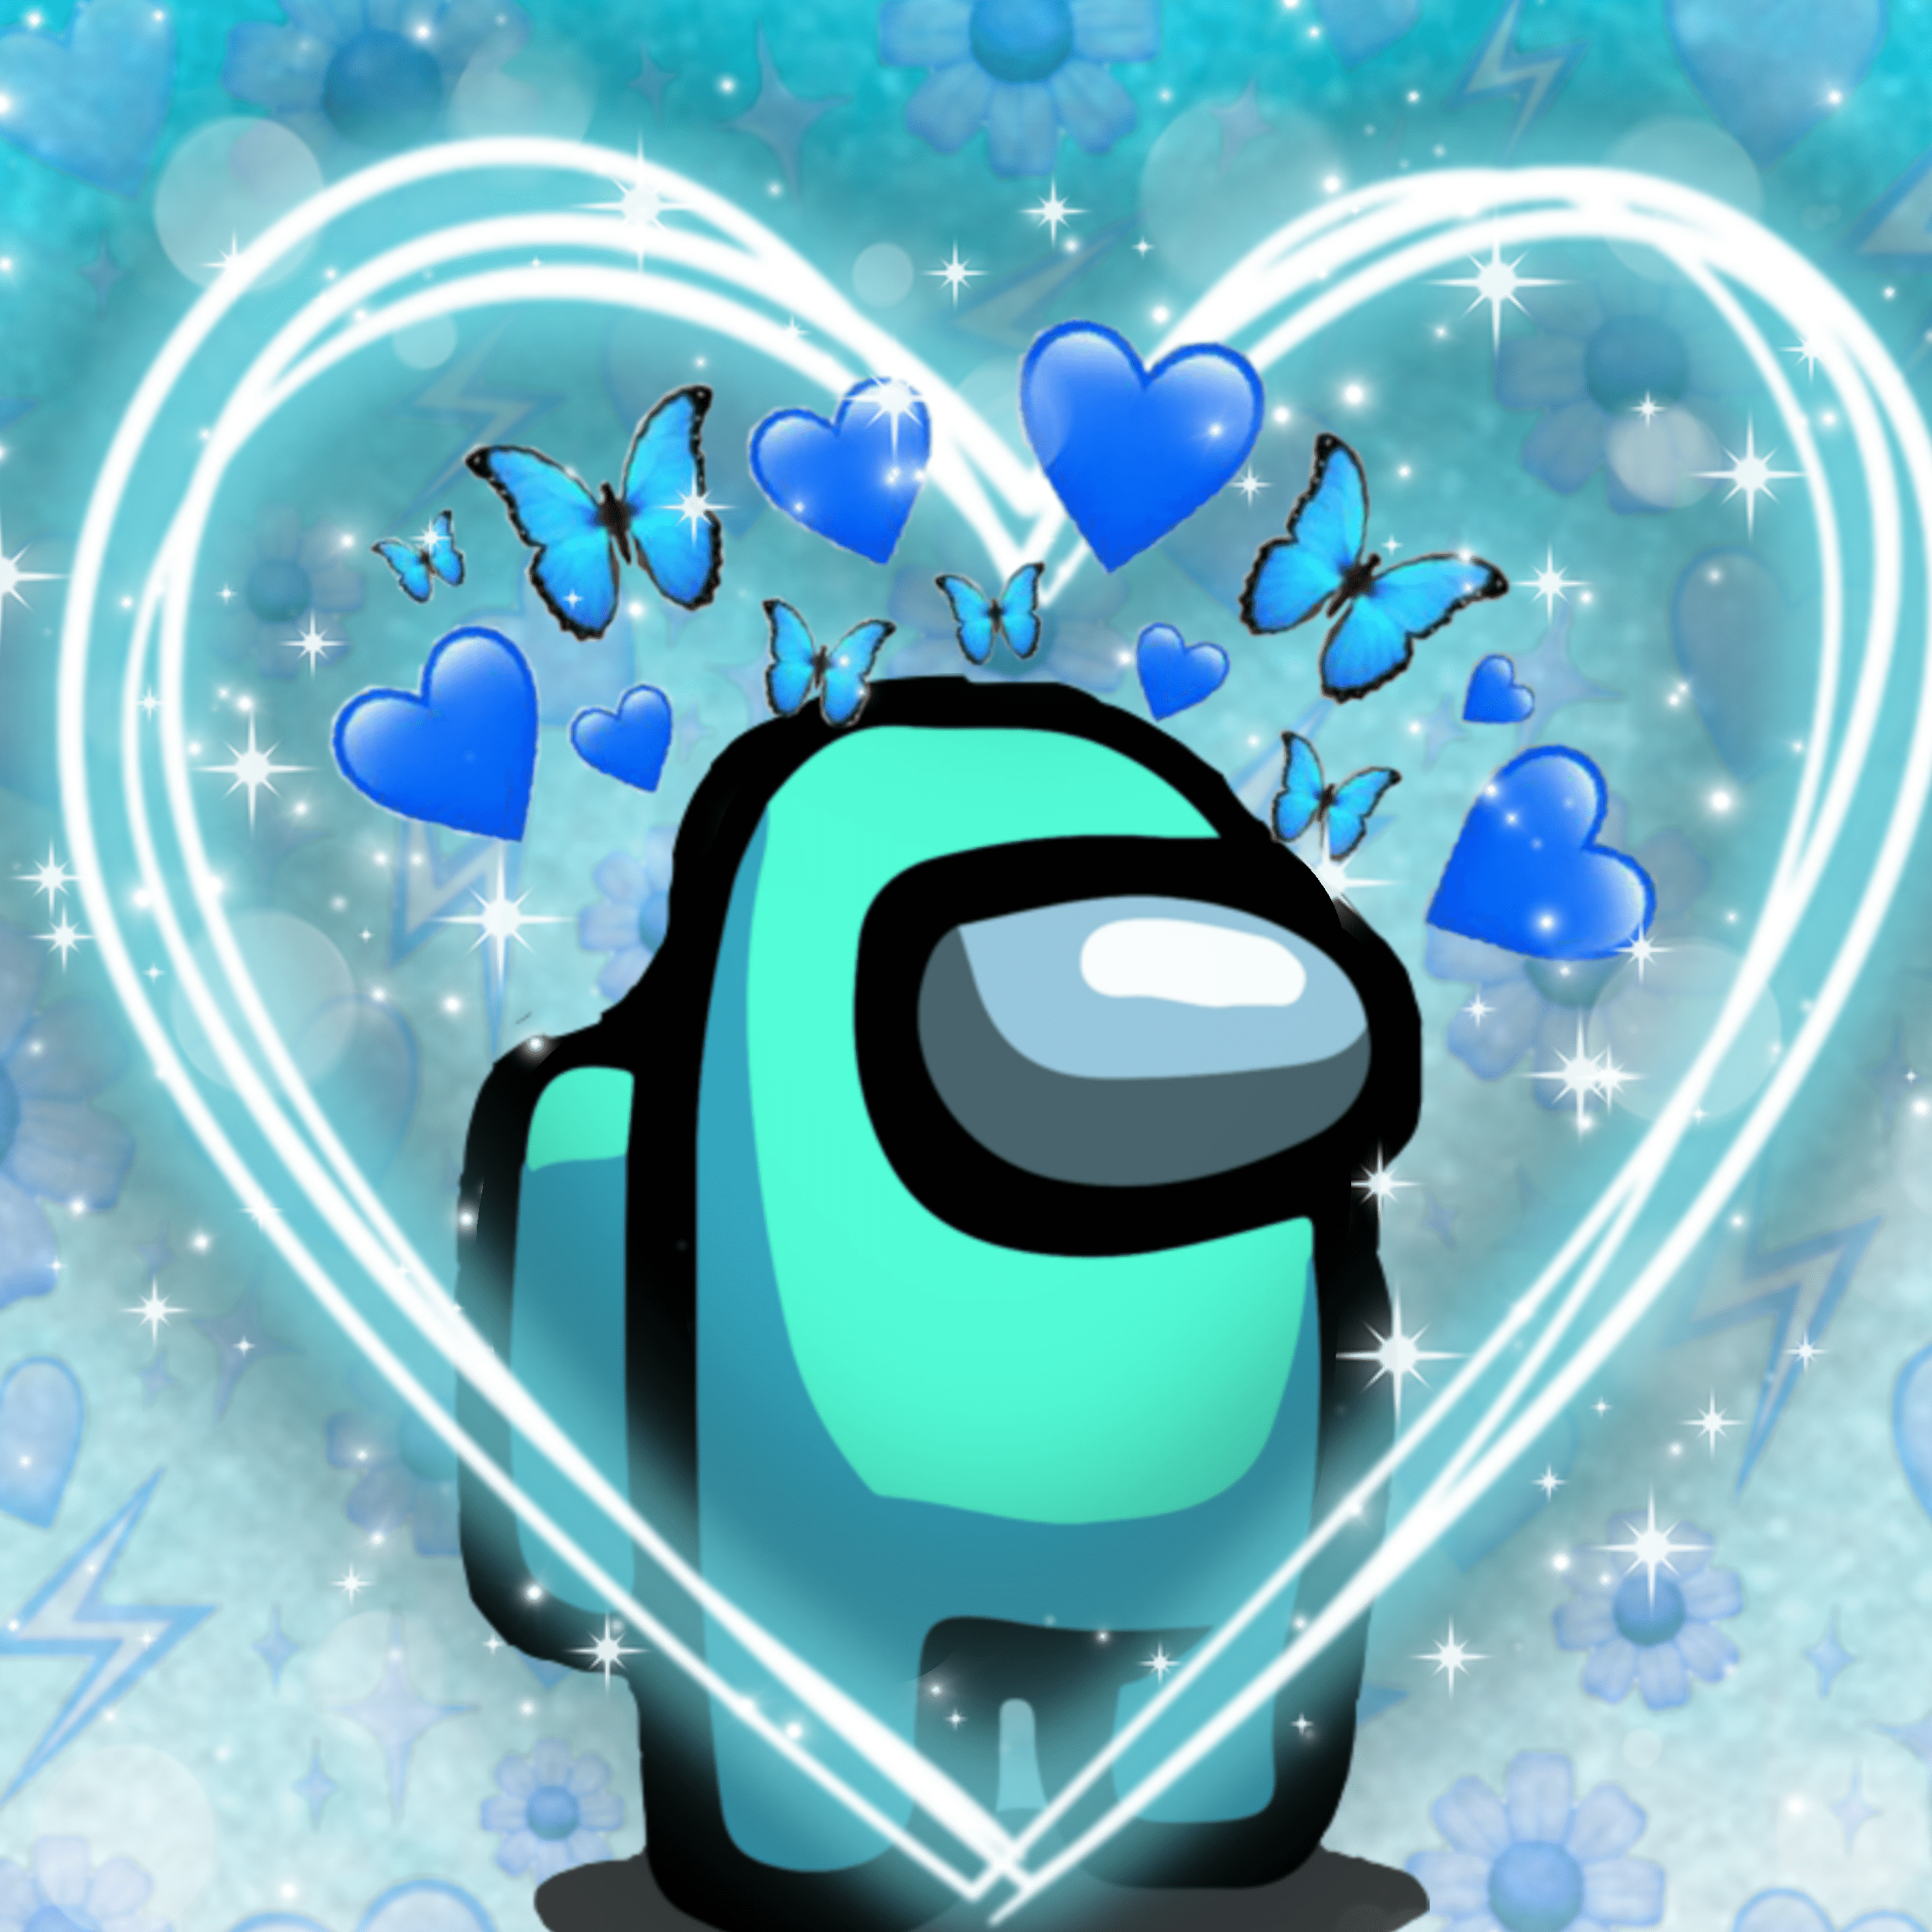 A teal imposter sheep stands in front of a heart outline surrounded by blue butterflies - Cyan